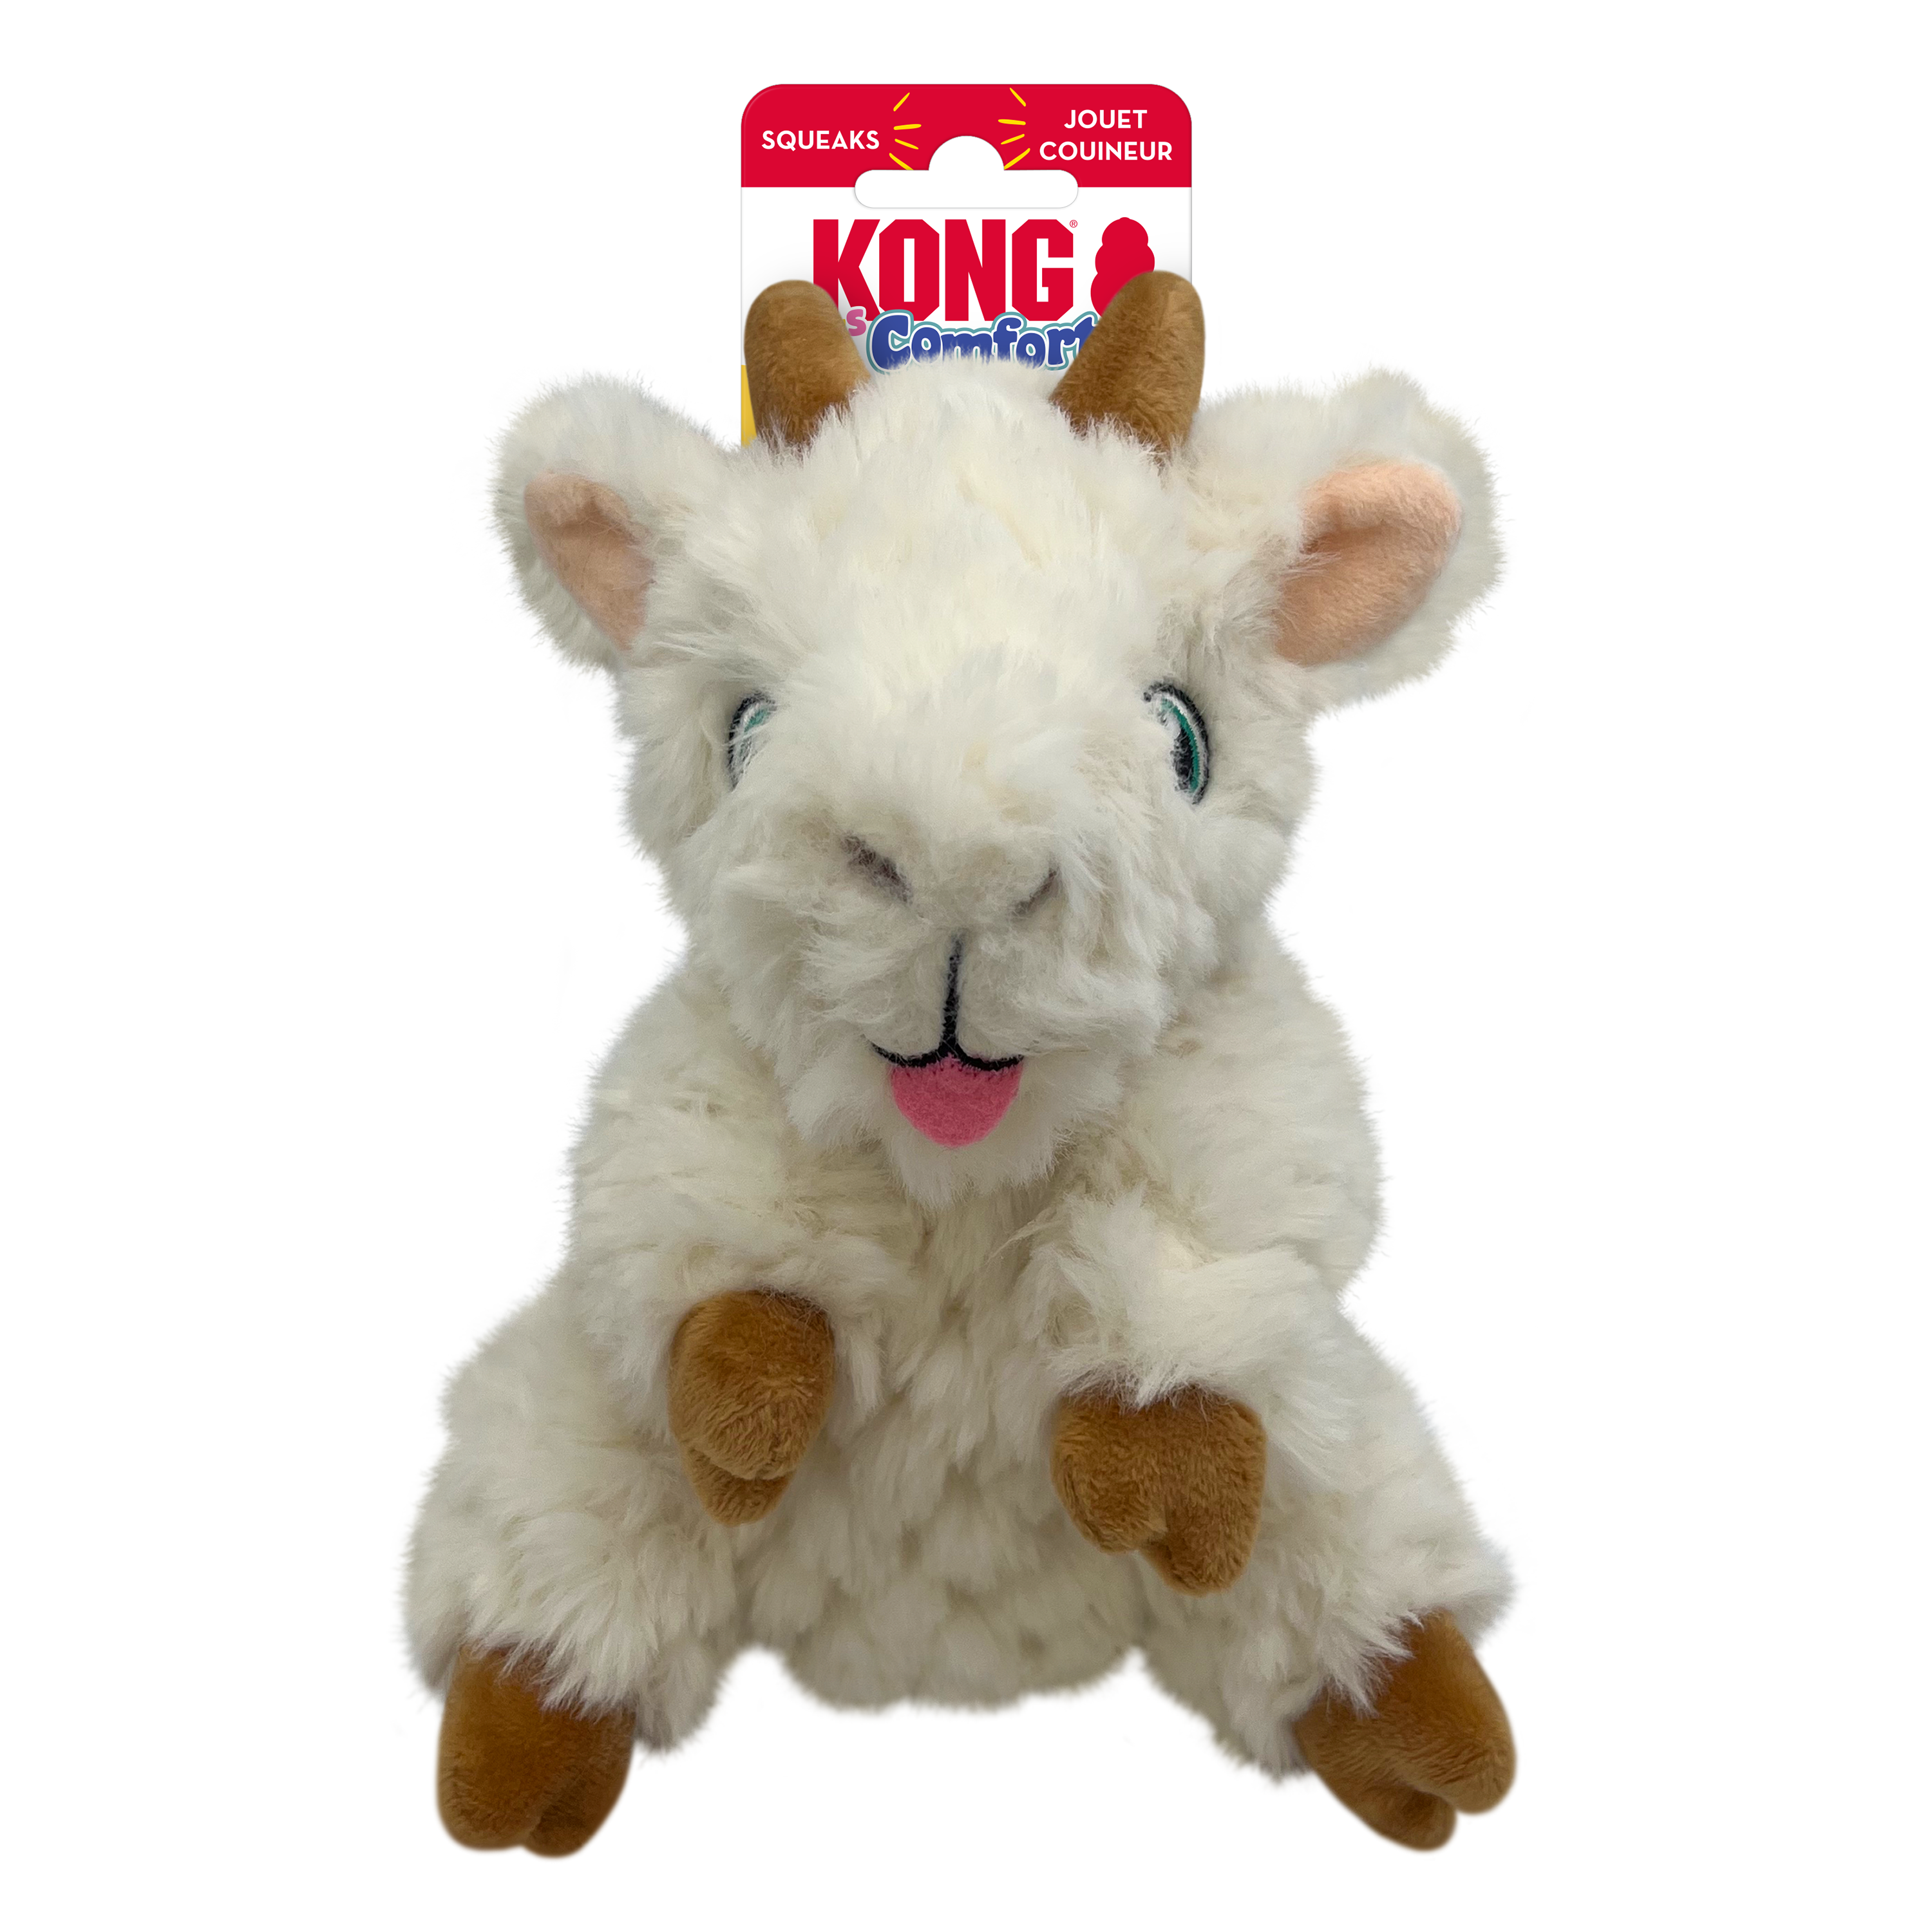 Comfort Tykes Goat onpack product image